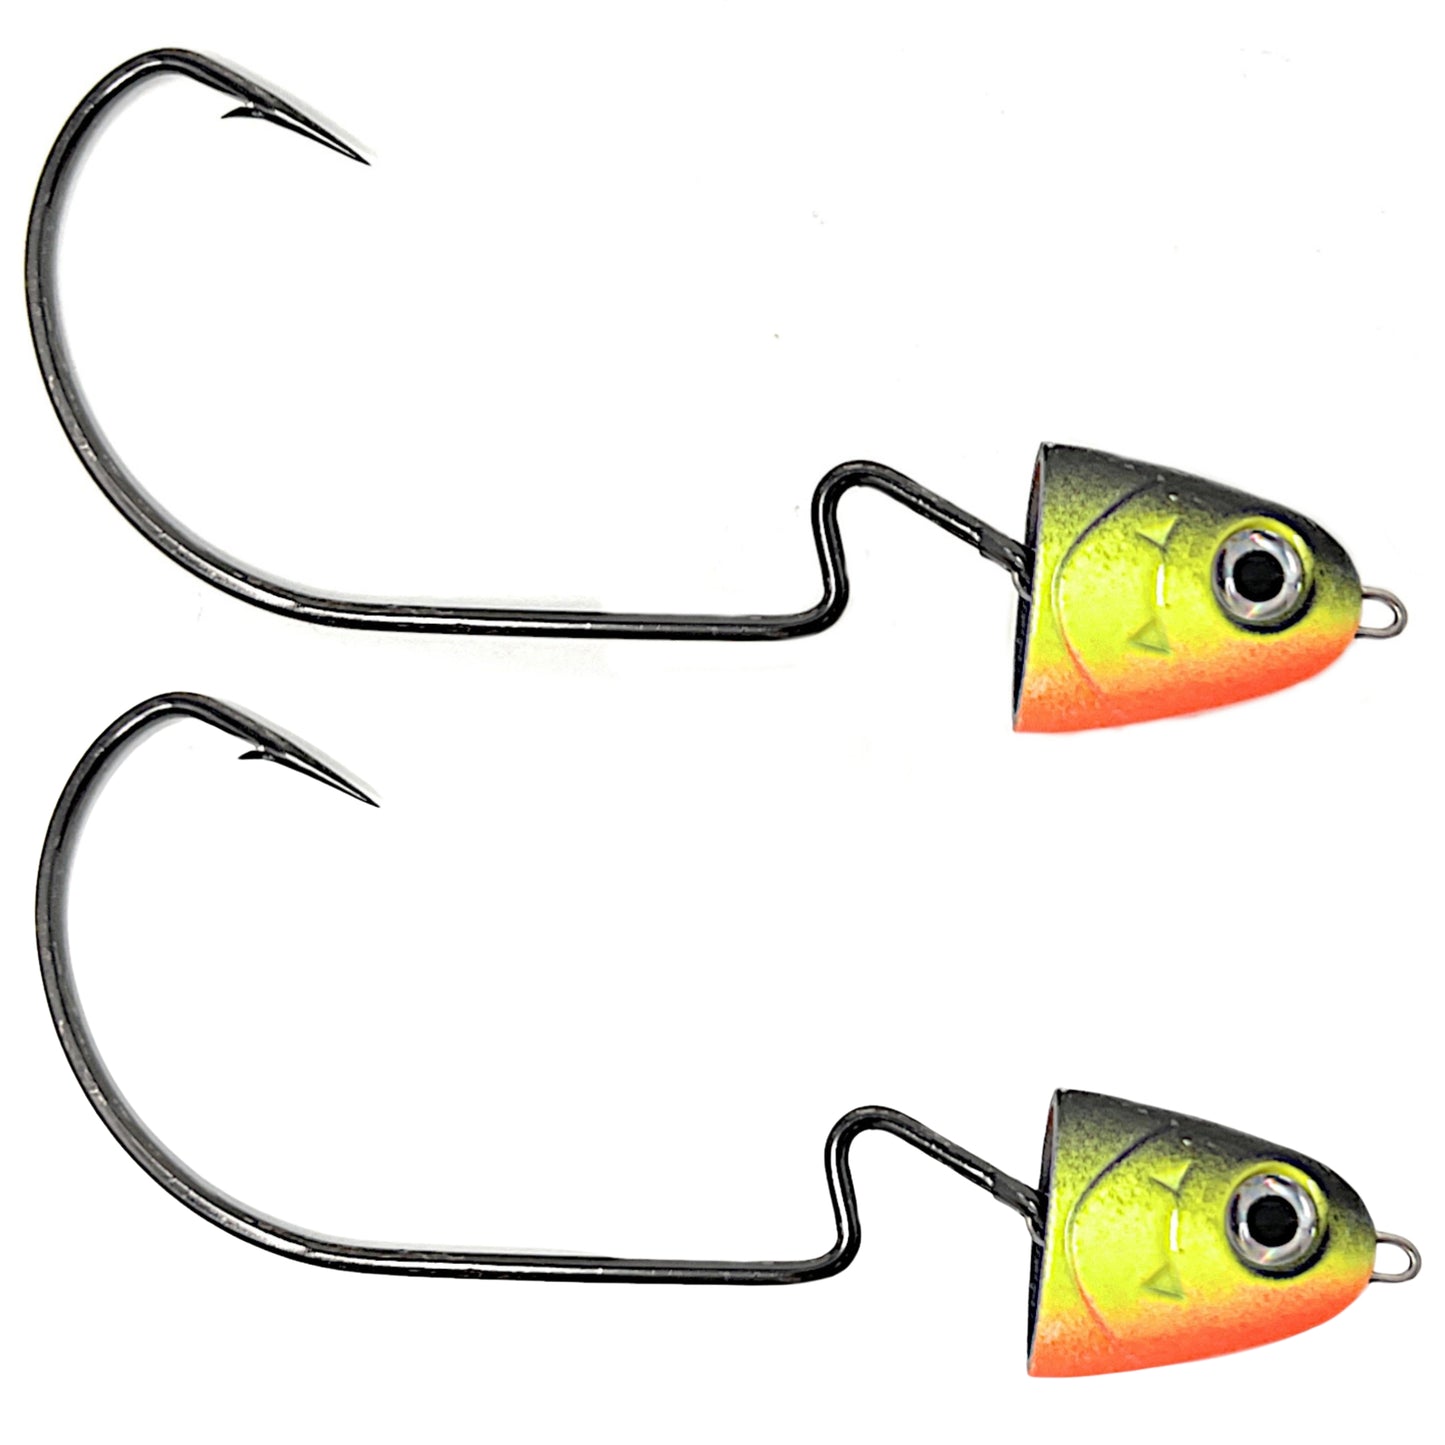 Reaction Tackle Tungsten Swing/ Swimbait Jig Heads (2 Pack)